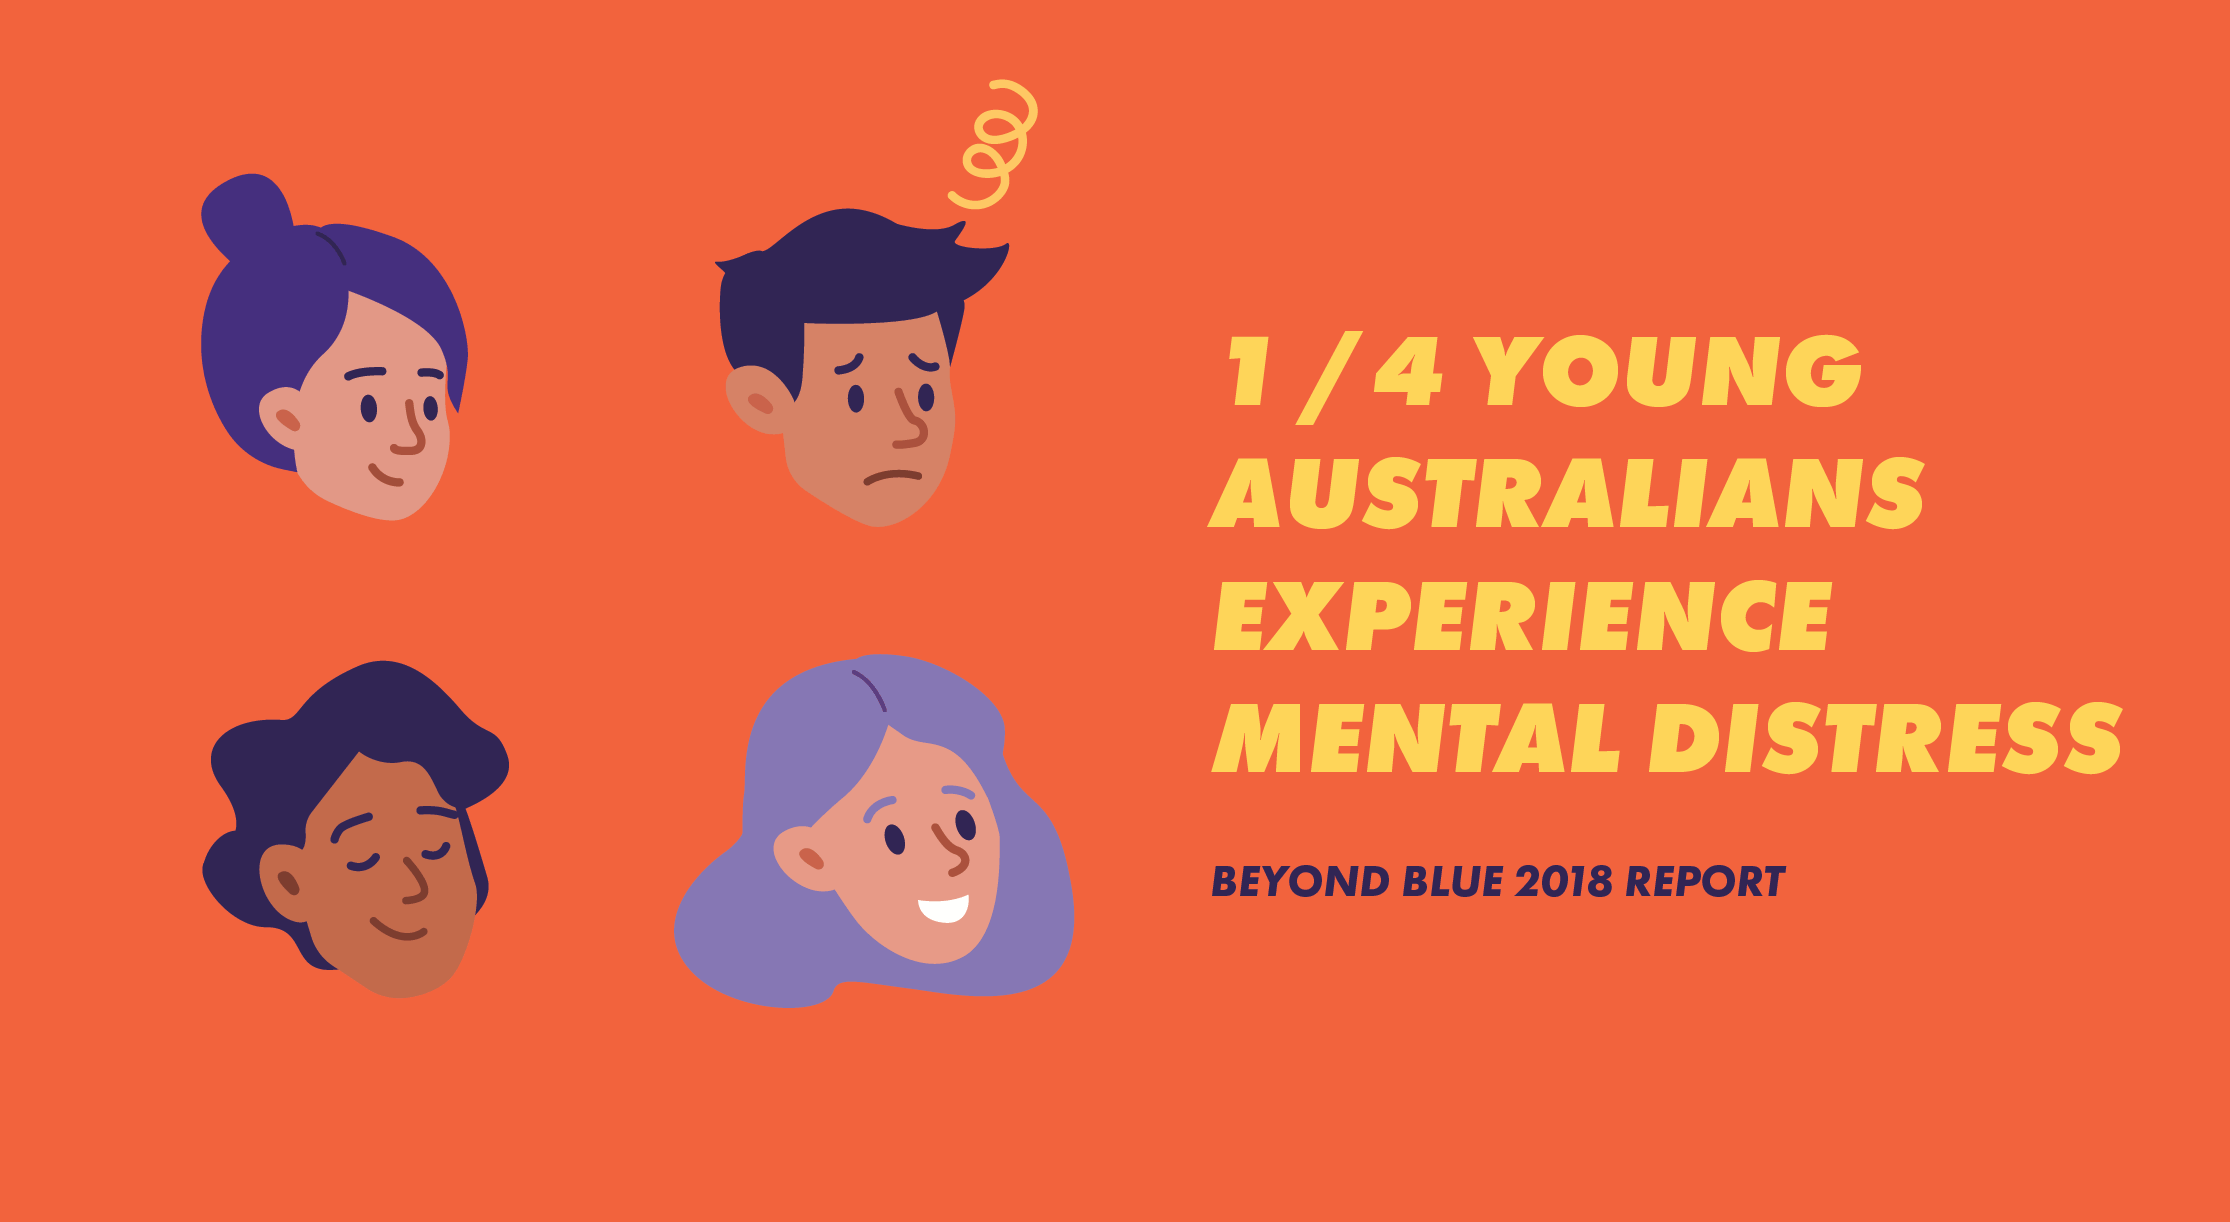 mental health help for teenagers - 1/4 young Australians experience mental distress